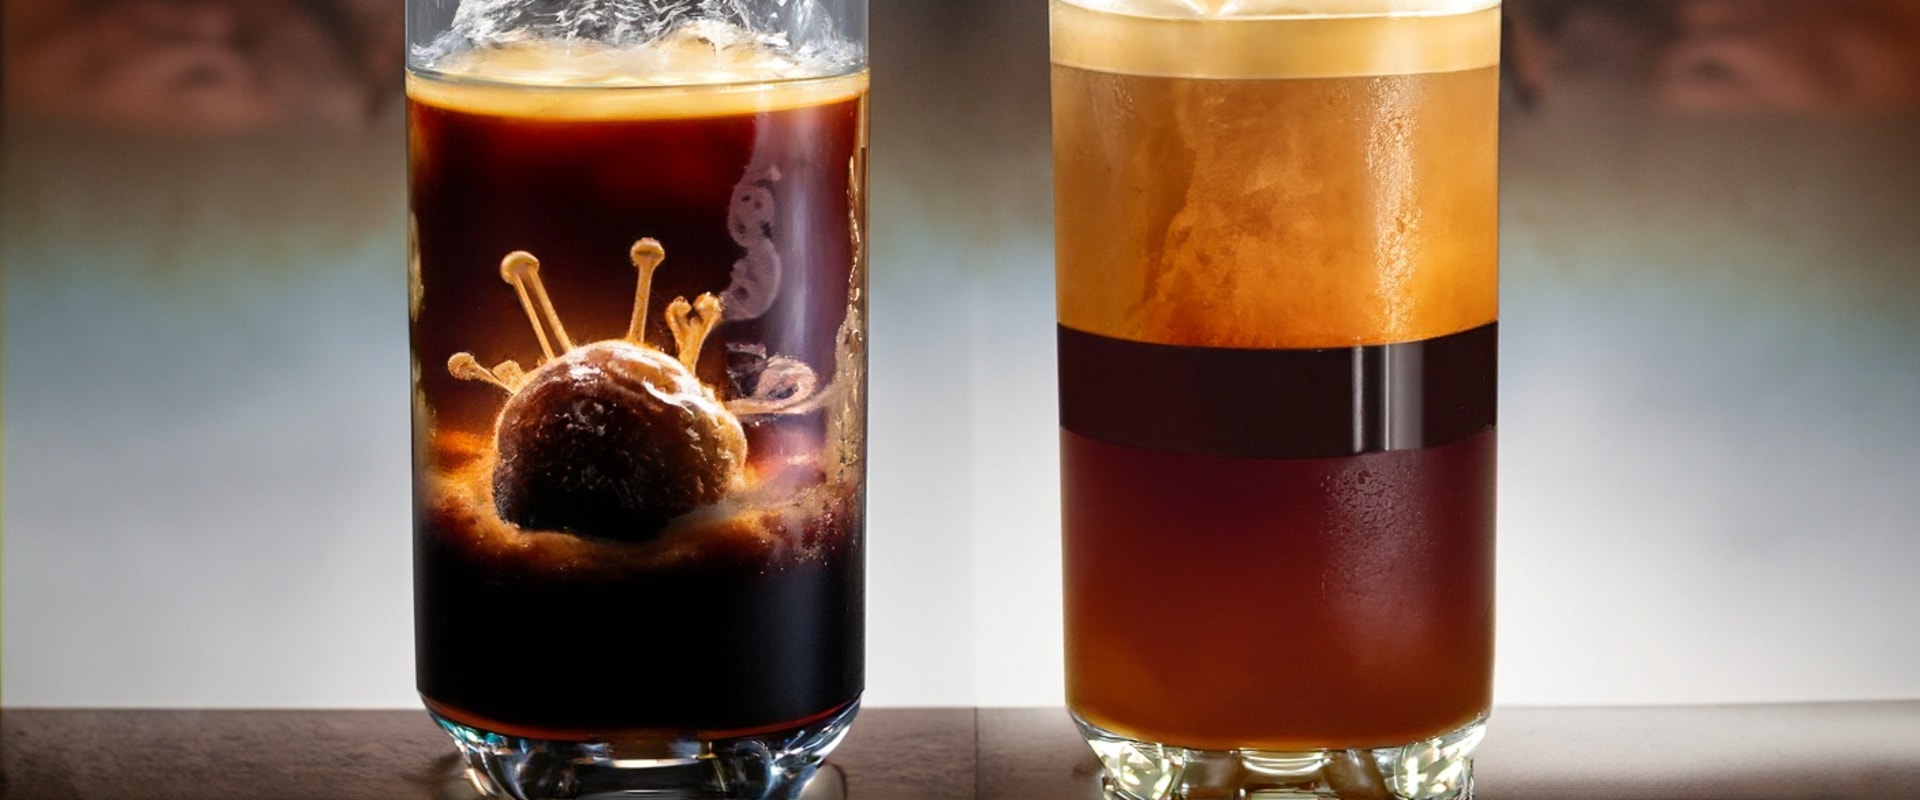 Does nitro brew have more caffeine than cold brew?